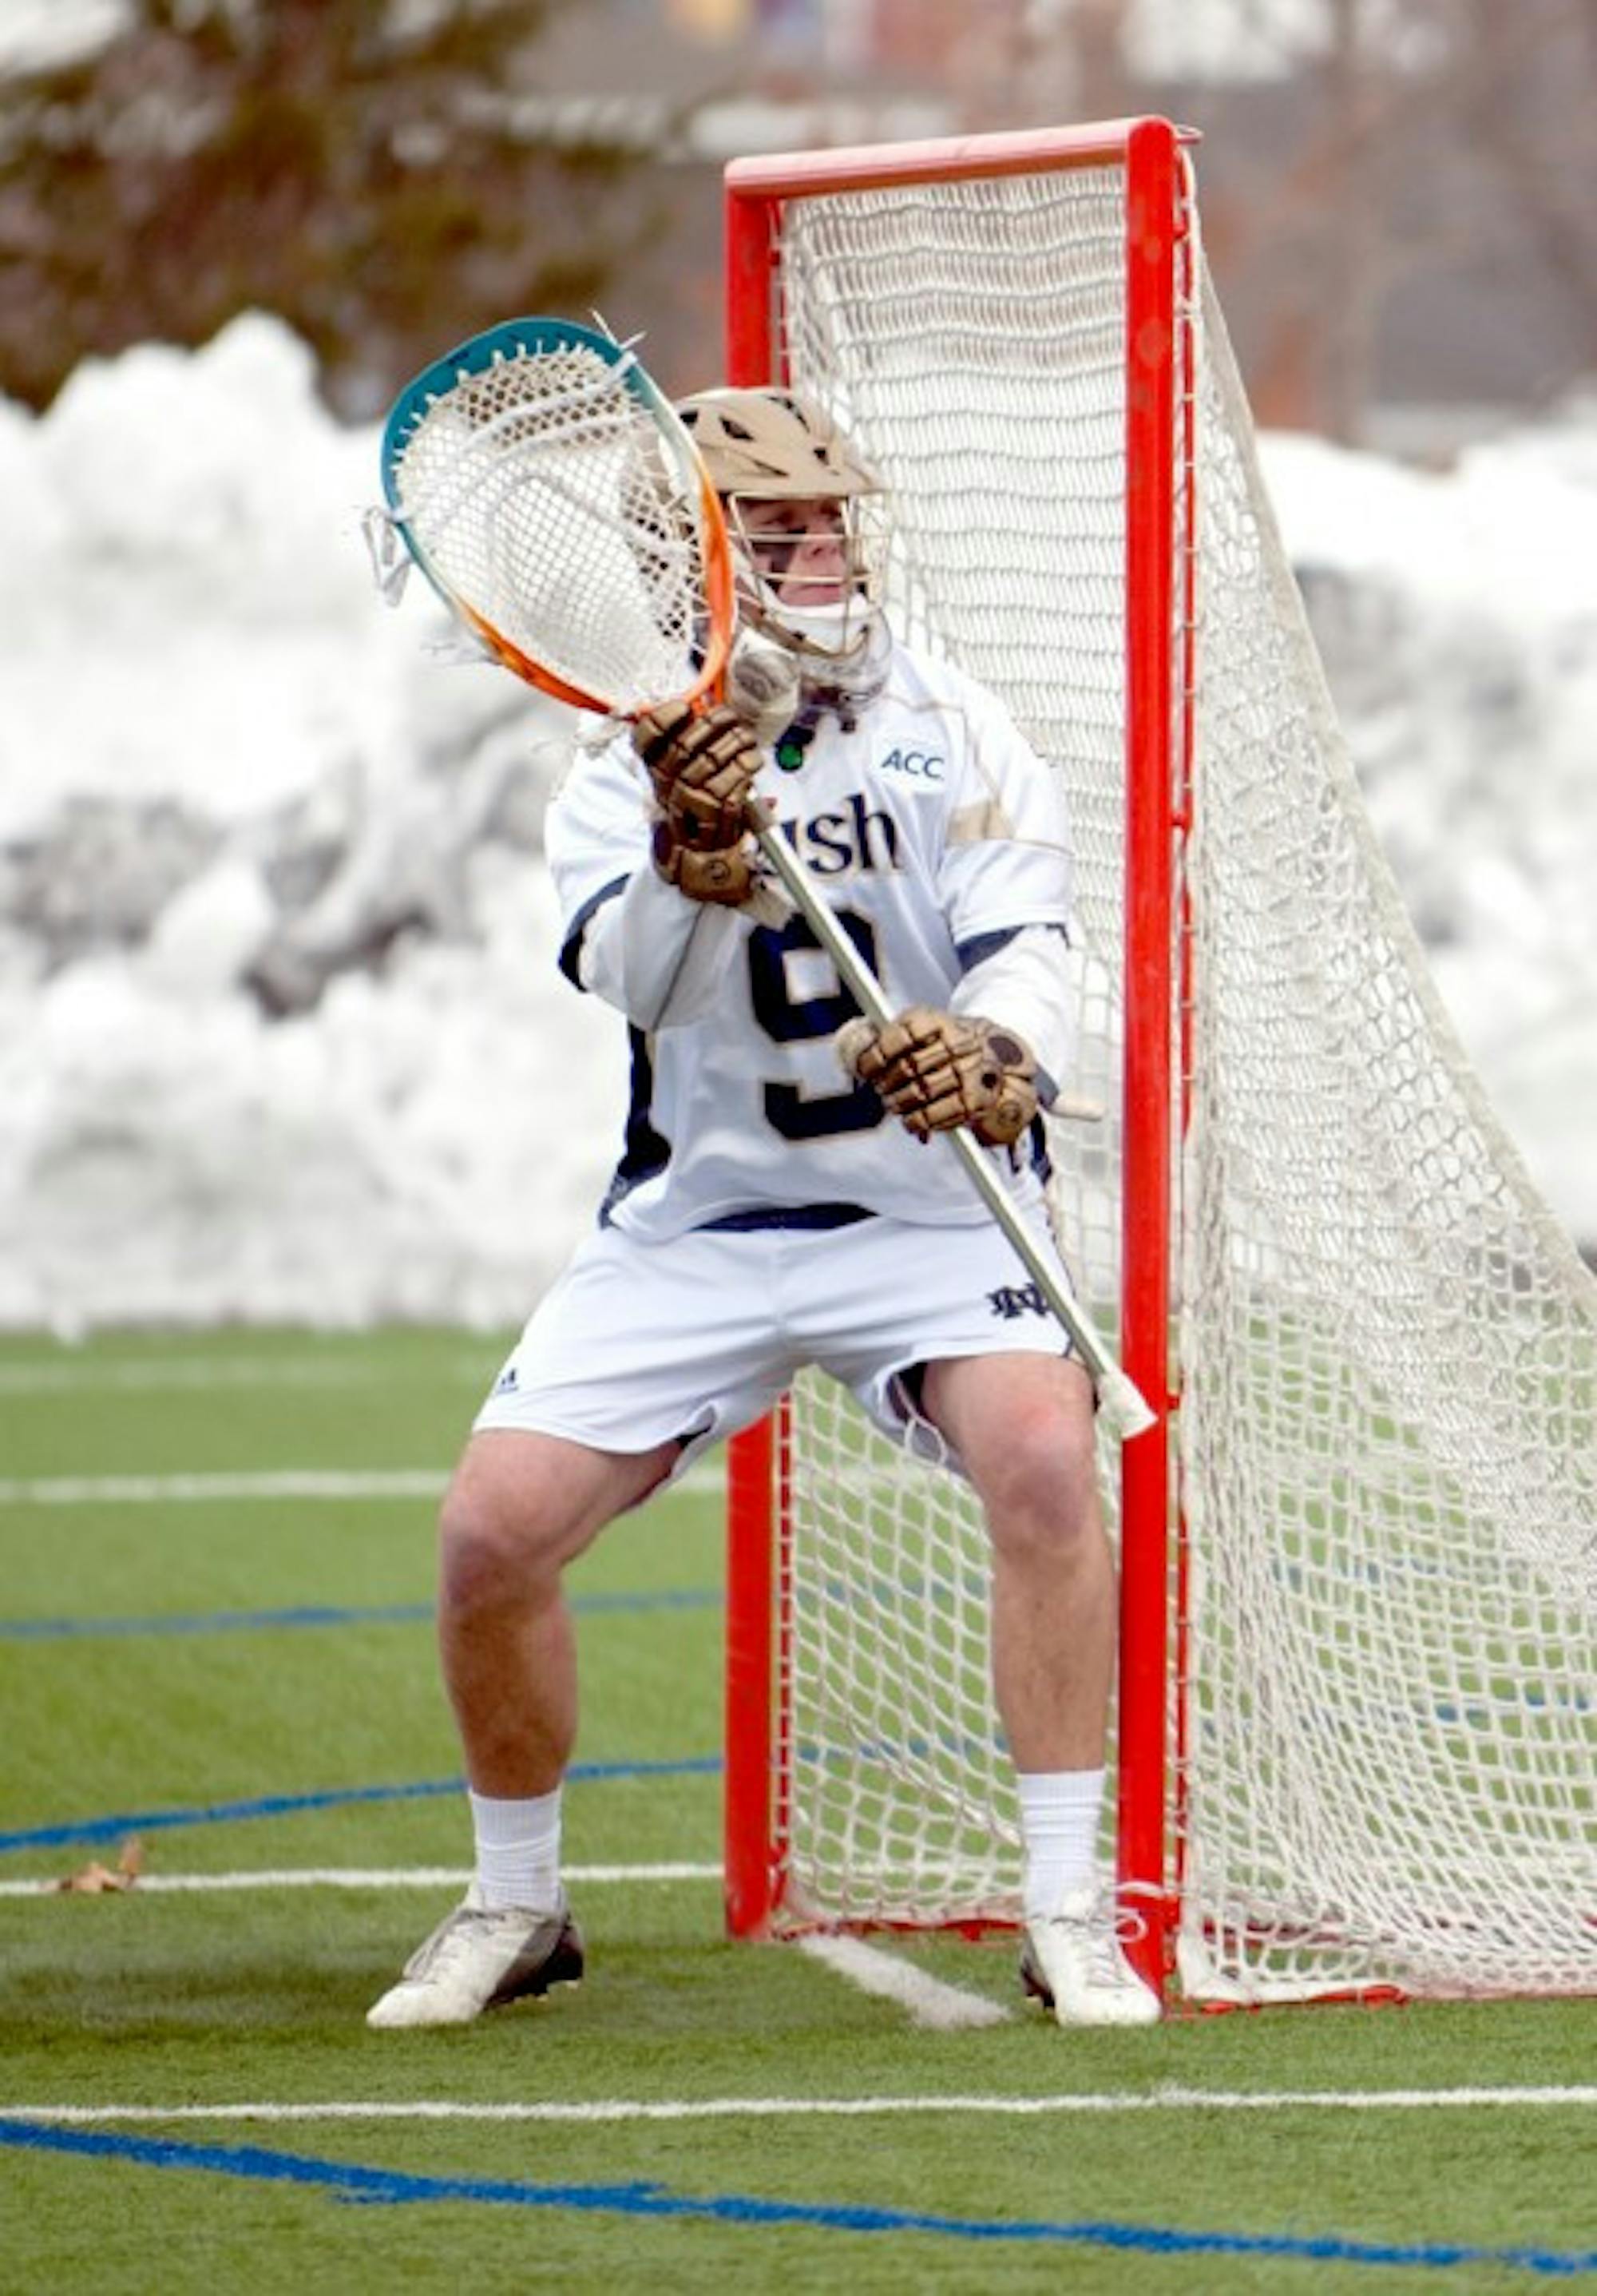 Junior goalkeeper Conor Kelly defends the goal during Notre Dame’s 8-7 loss to Penn State on Feb. 22 at Arlotta Stadium.